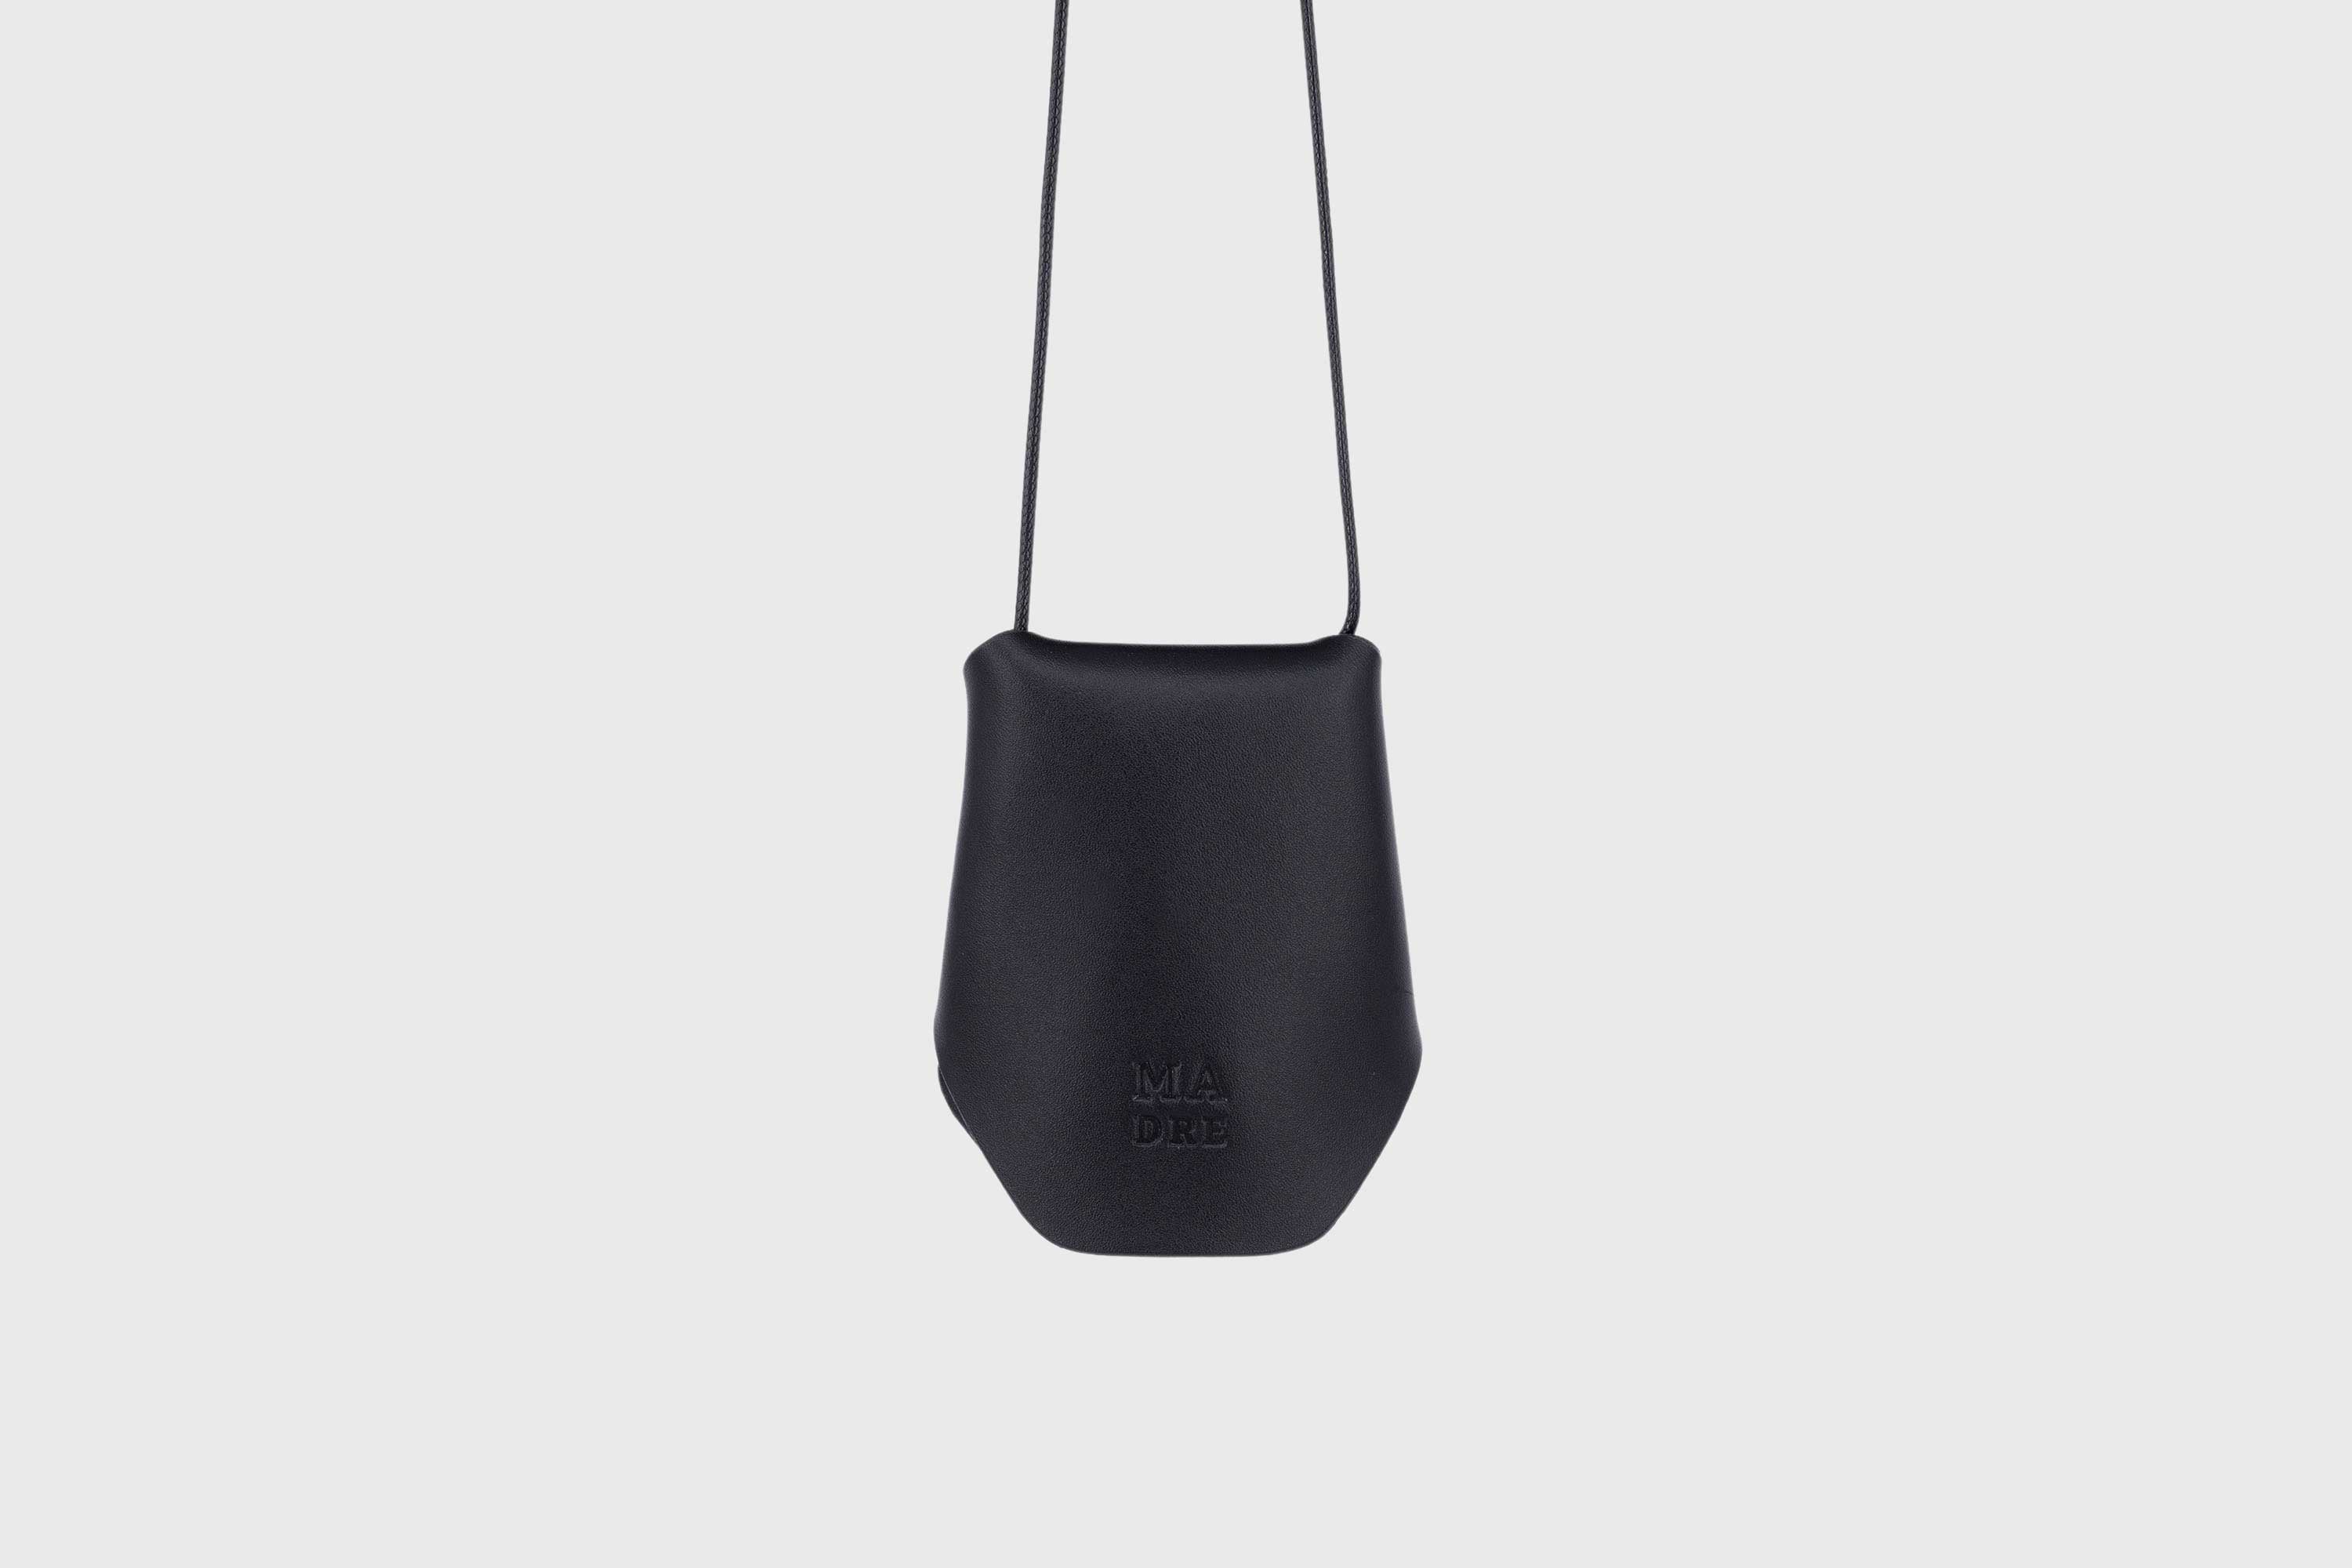 Keyhanger black color pouch leather clochette made out of vegetable tanned leather designed by atelier madre manuel dreesmann barcelona